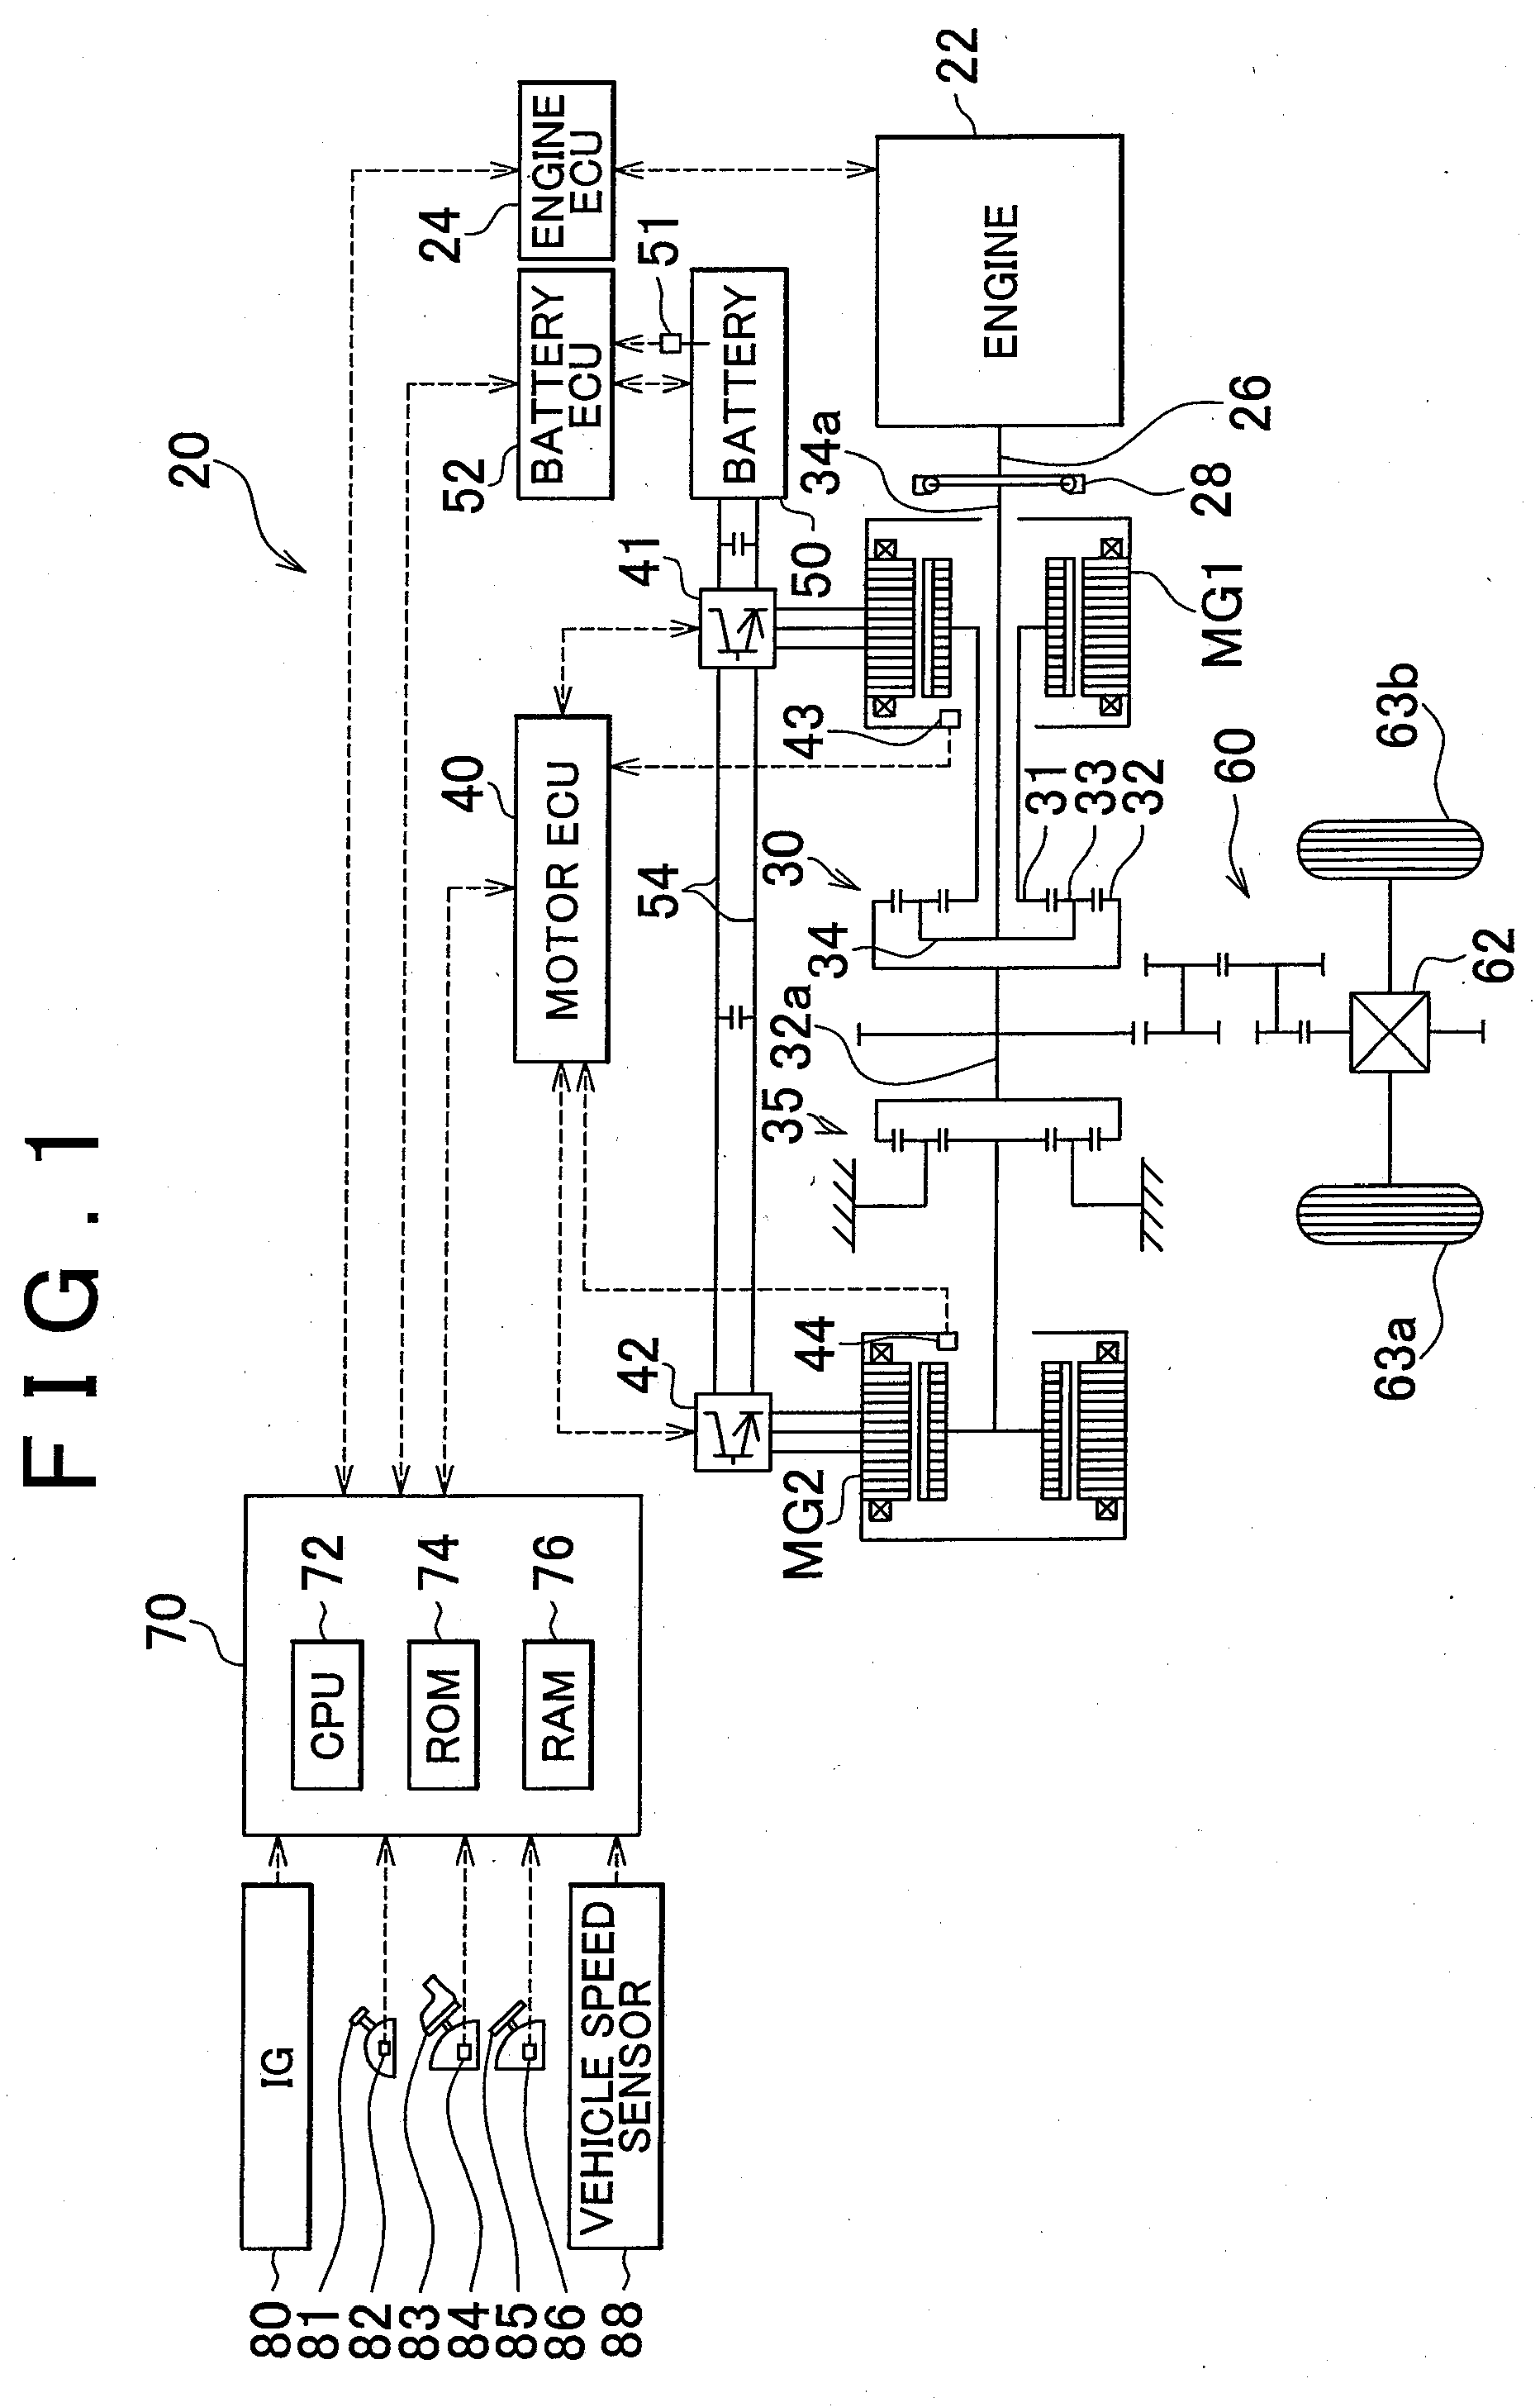 Misfire determination device and method for internal combustion engine, and vehicle including misfire determination device